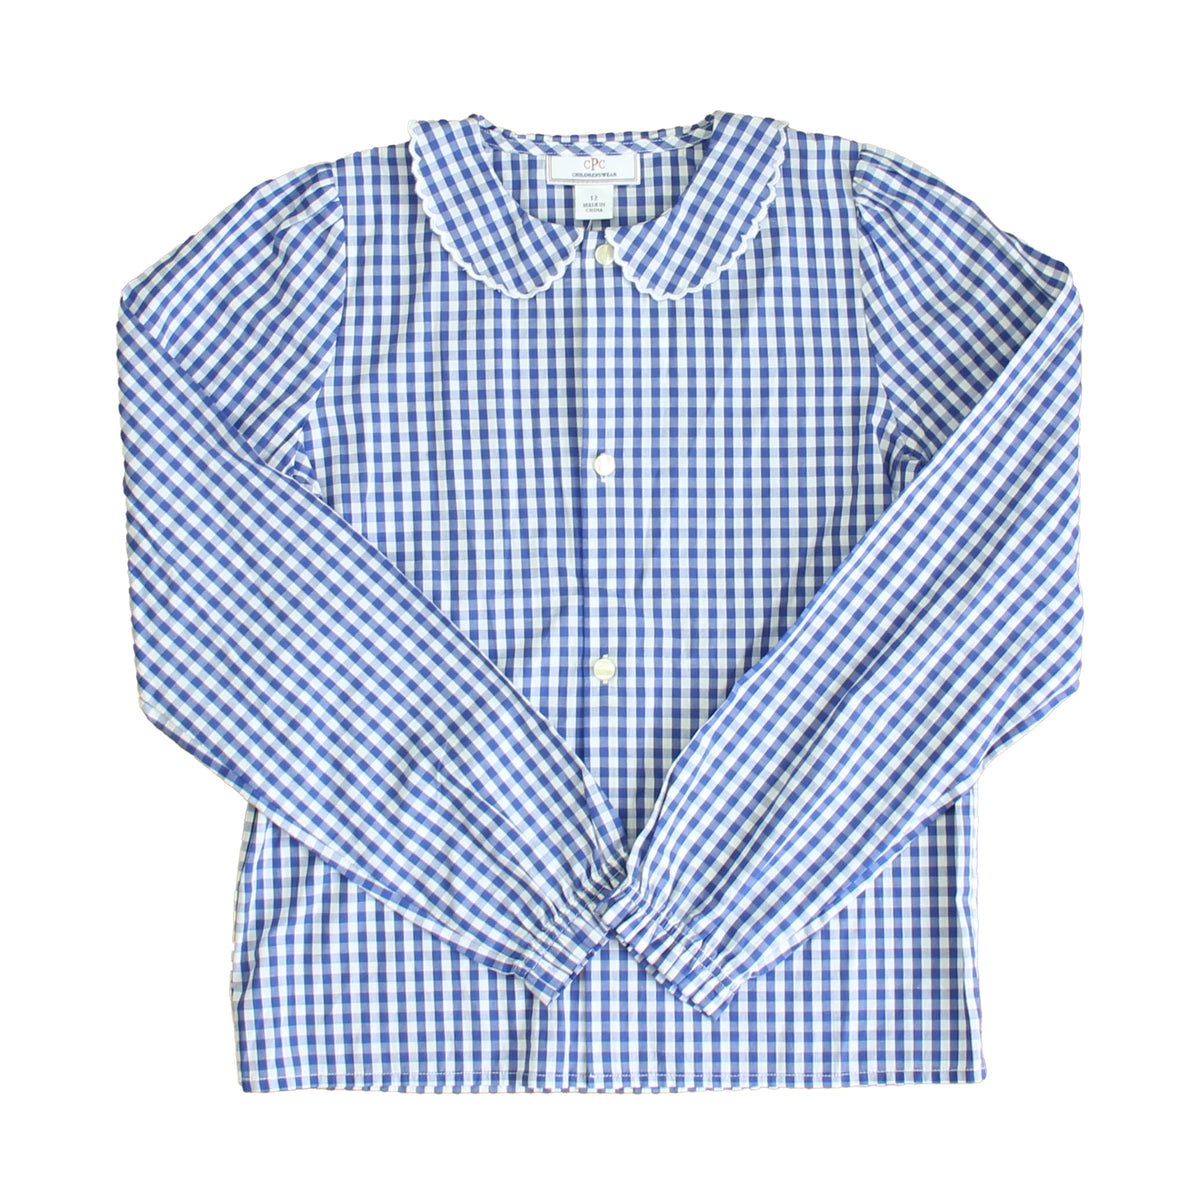 New with Tags: Blue Gingham Top -- FINAL SALE